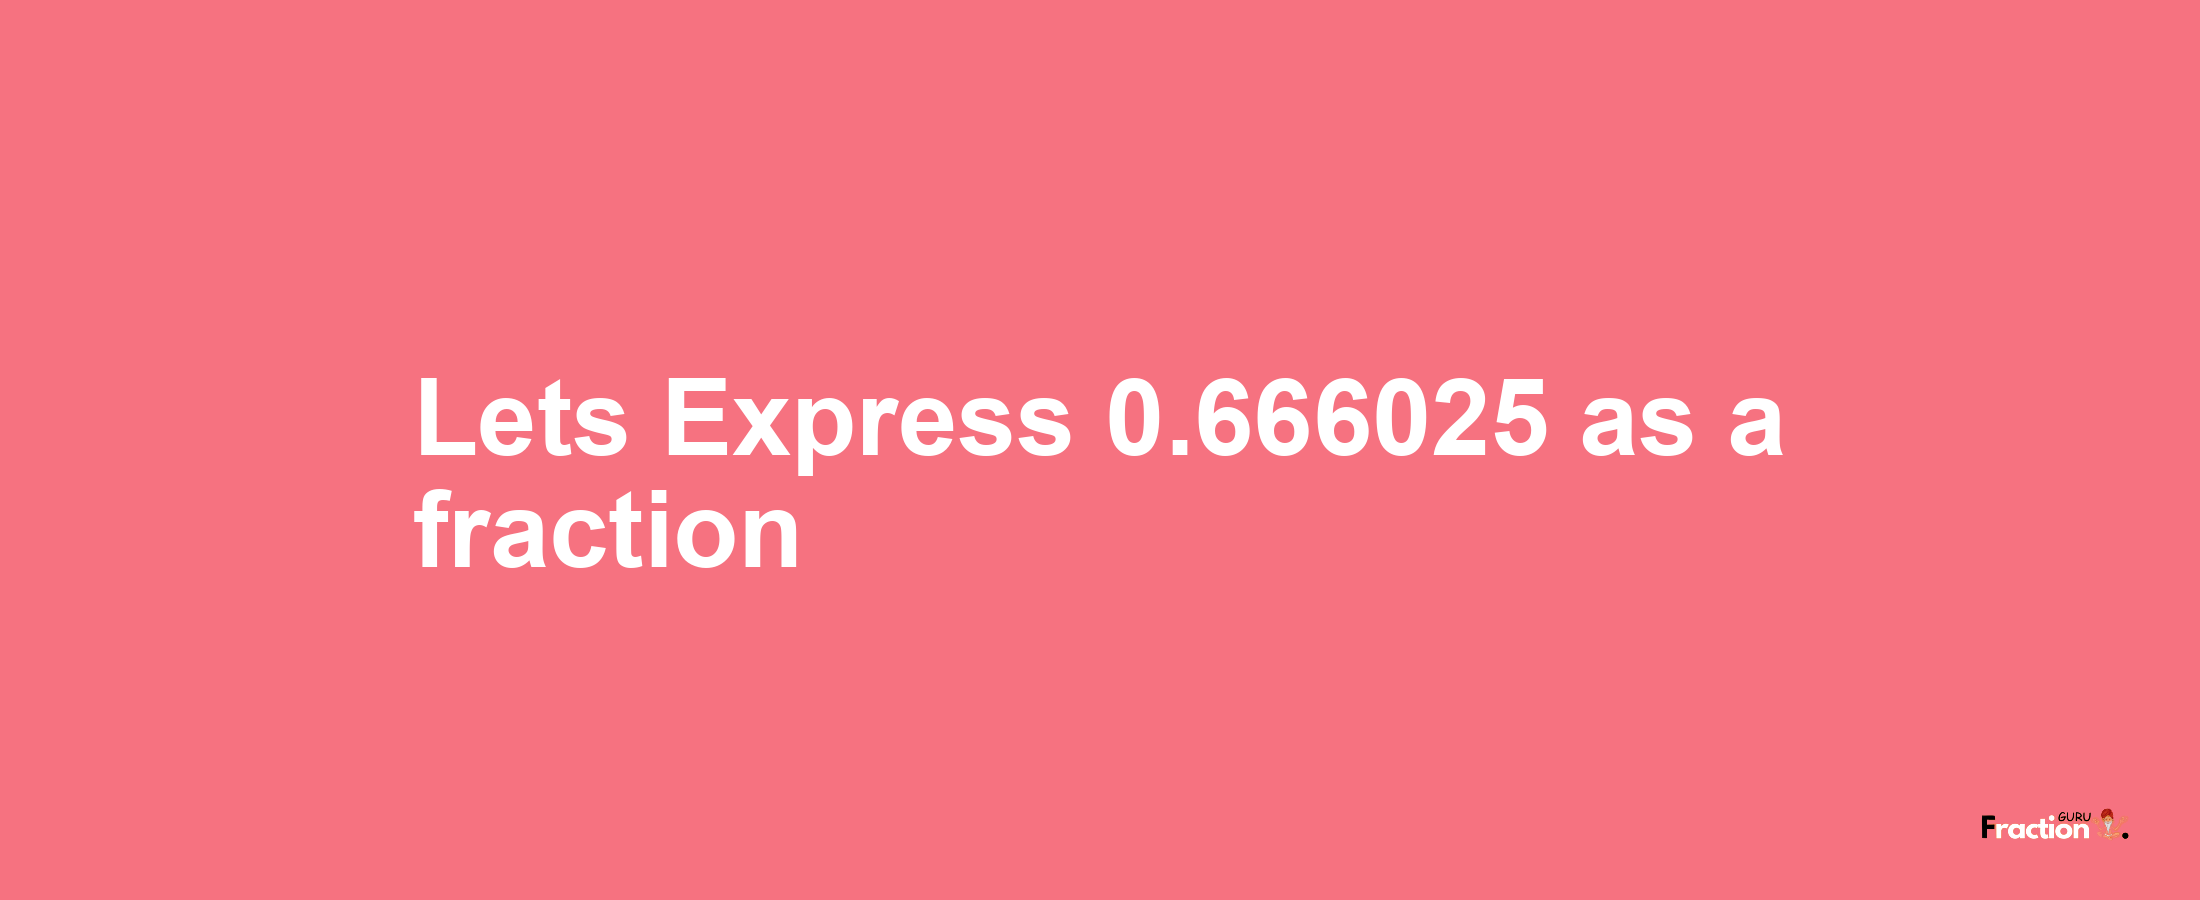 Lets Express 0.666025 as afraction